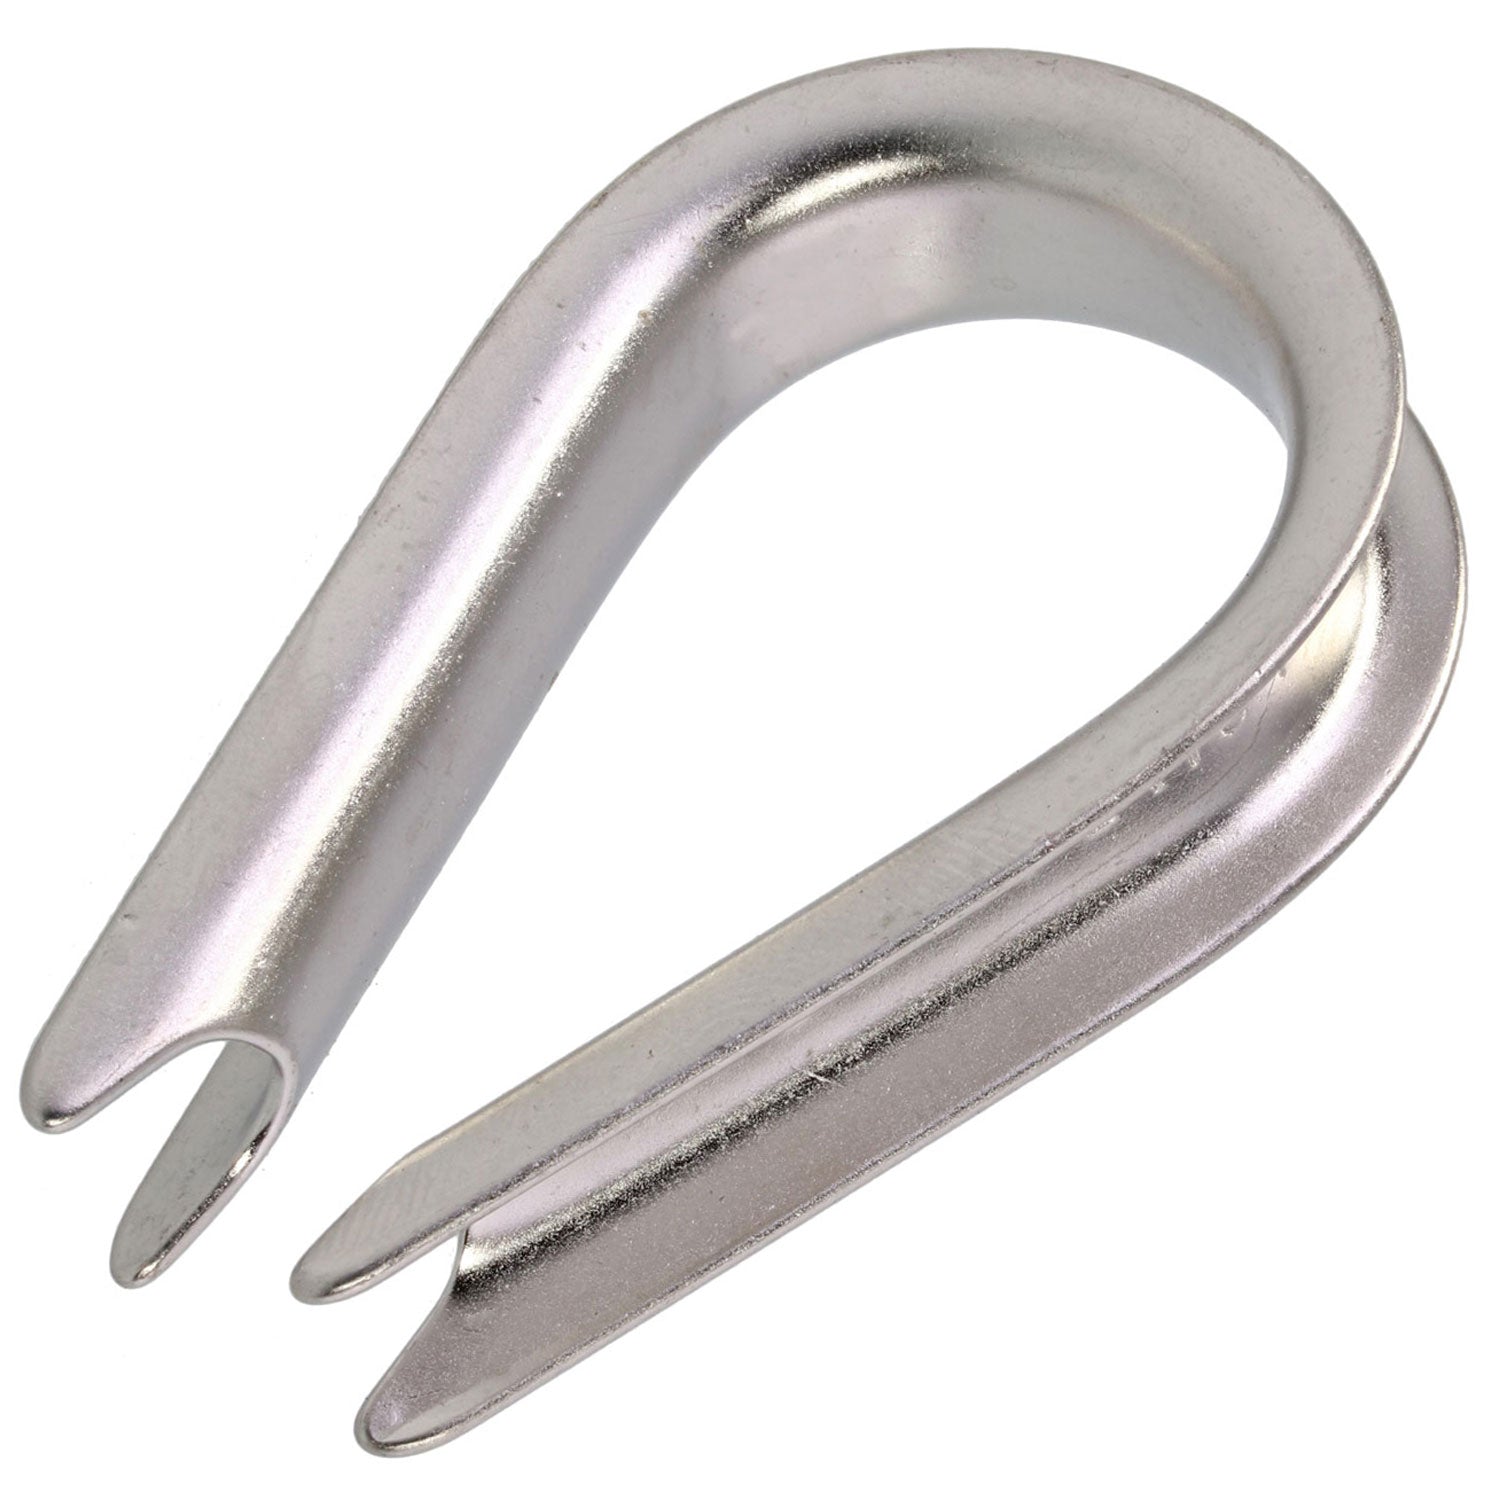 5/16 Light Duty Stainless Steel Wire Rope Thimble